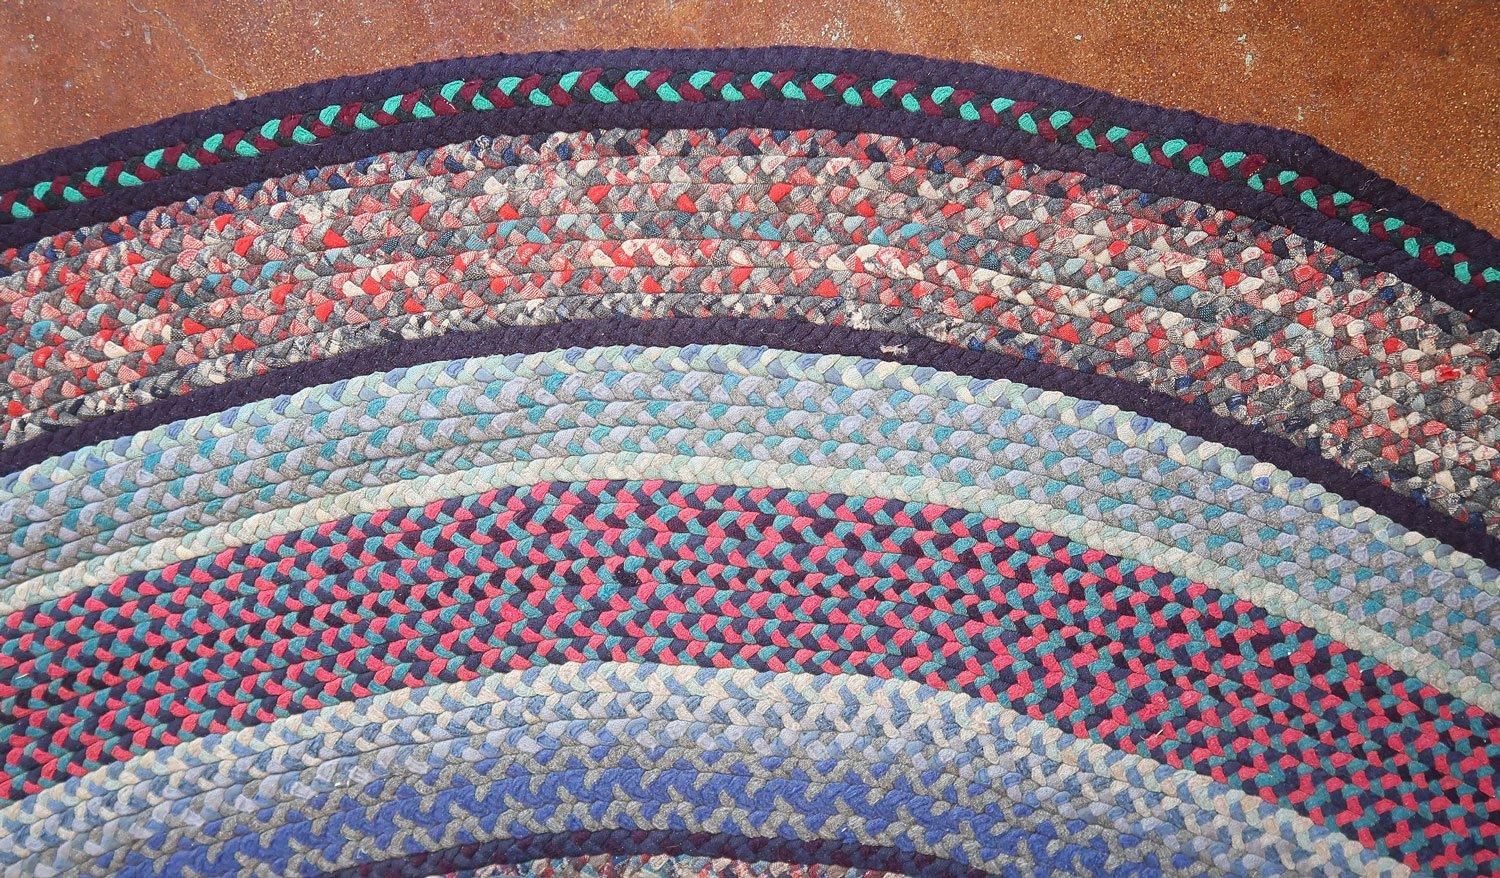 This colorful, room-size, oval, hand-braided rug was found here in Maine where braiding rugs with wool scraps was a traditional home craft, as it was in many rural areas across the country.The condition is pristine and fantastic with country style